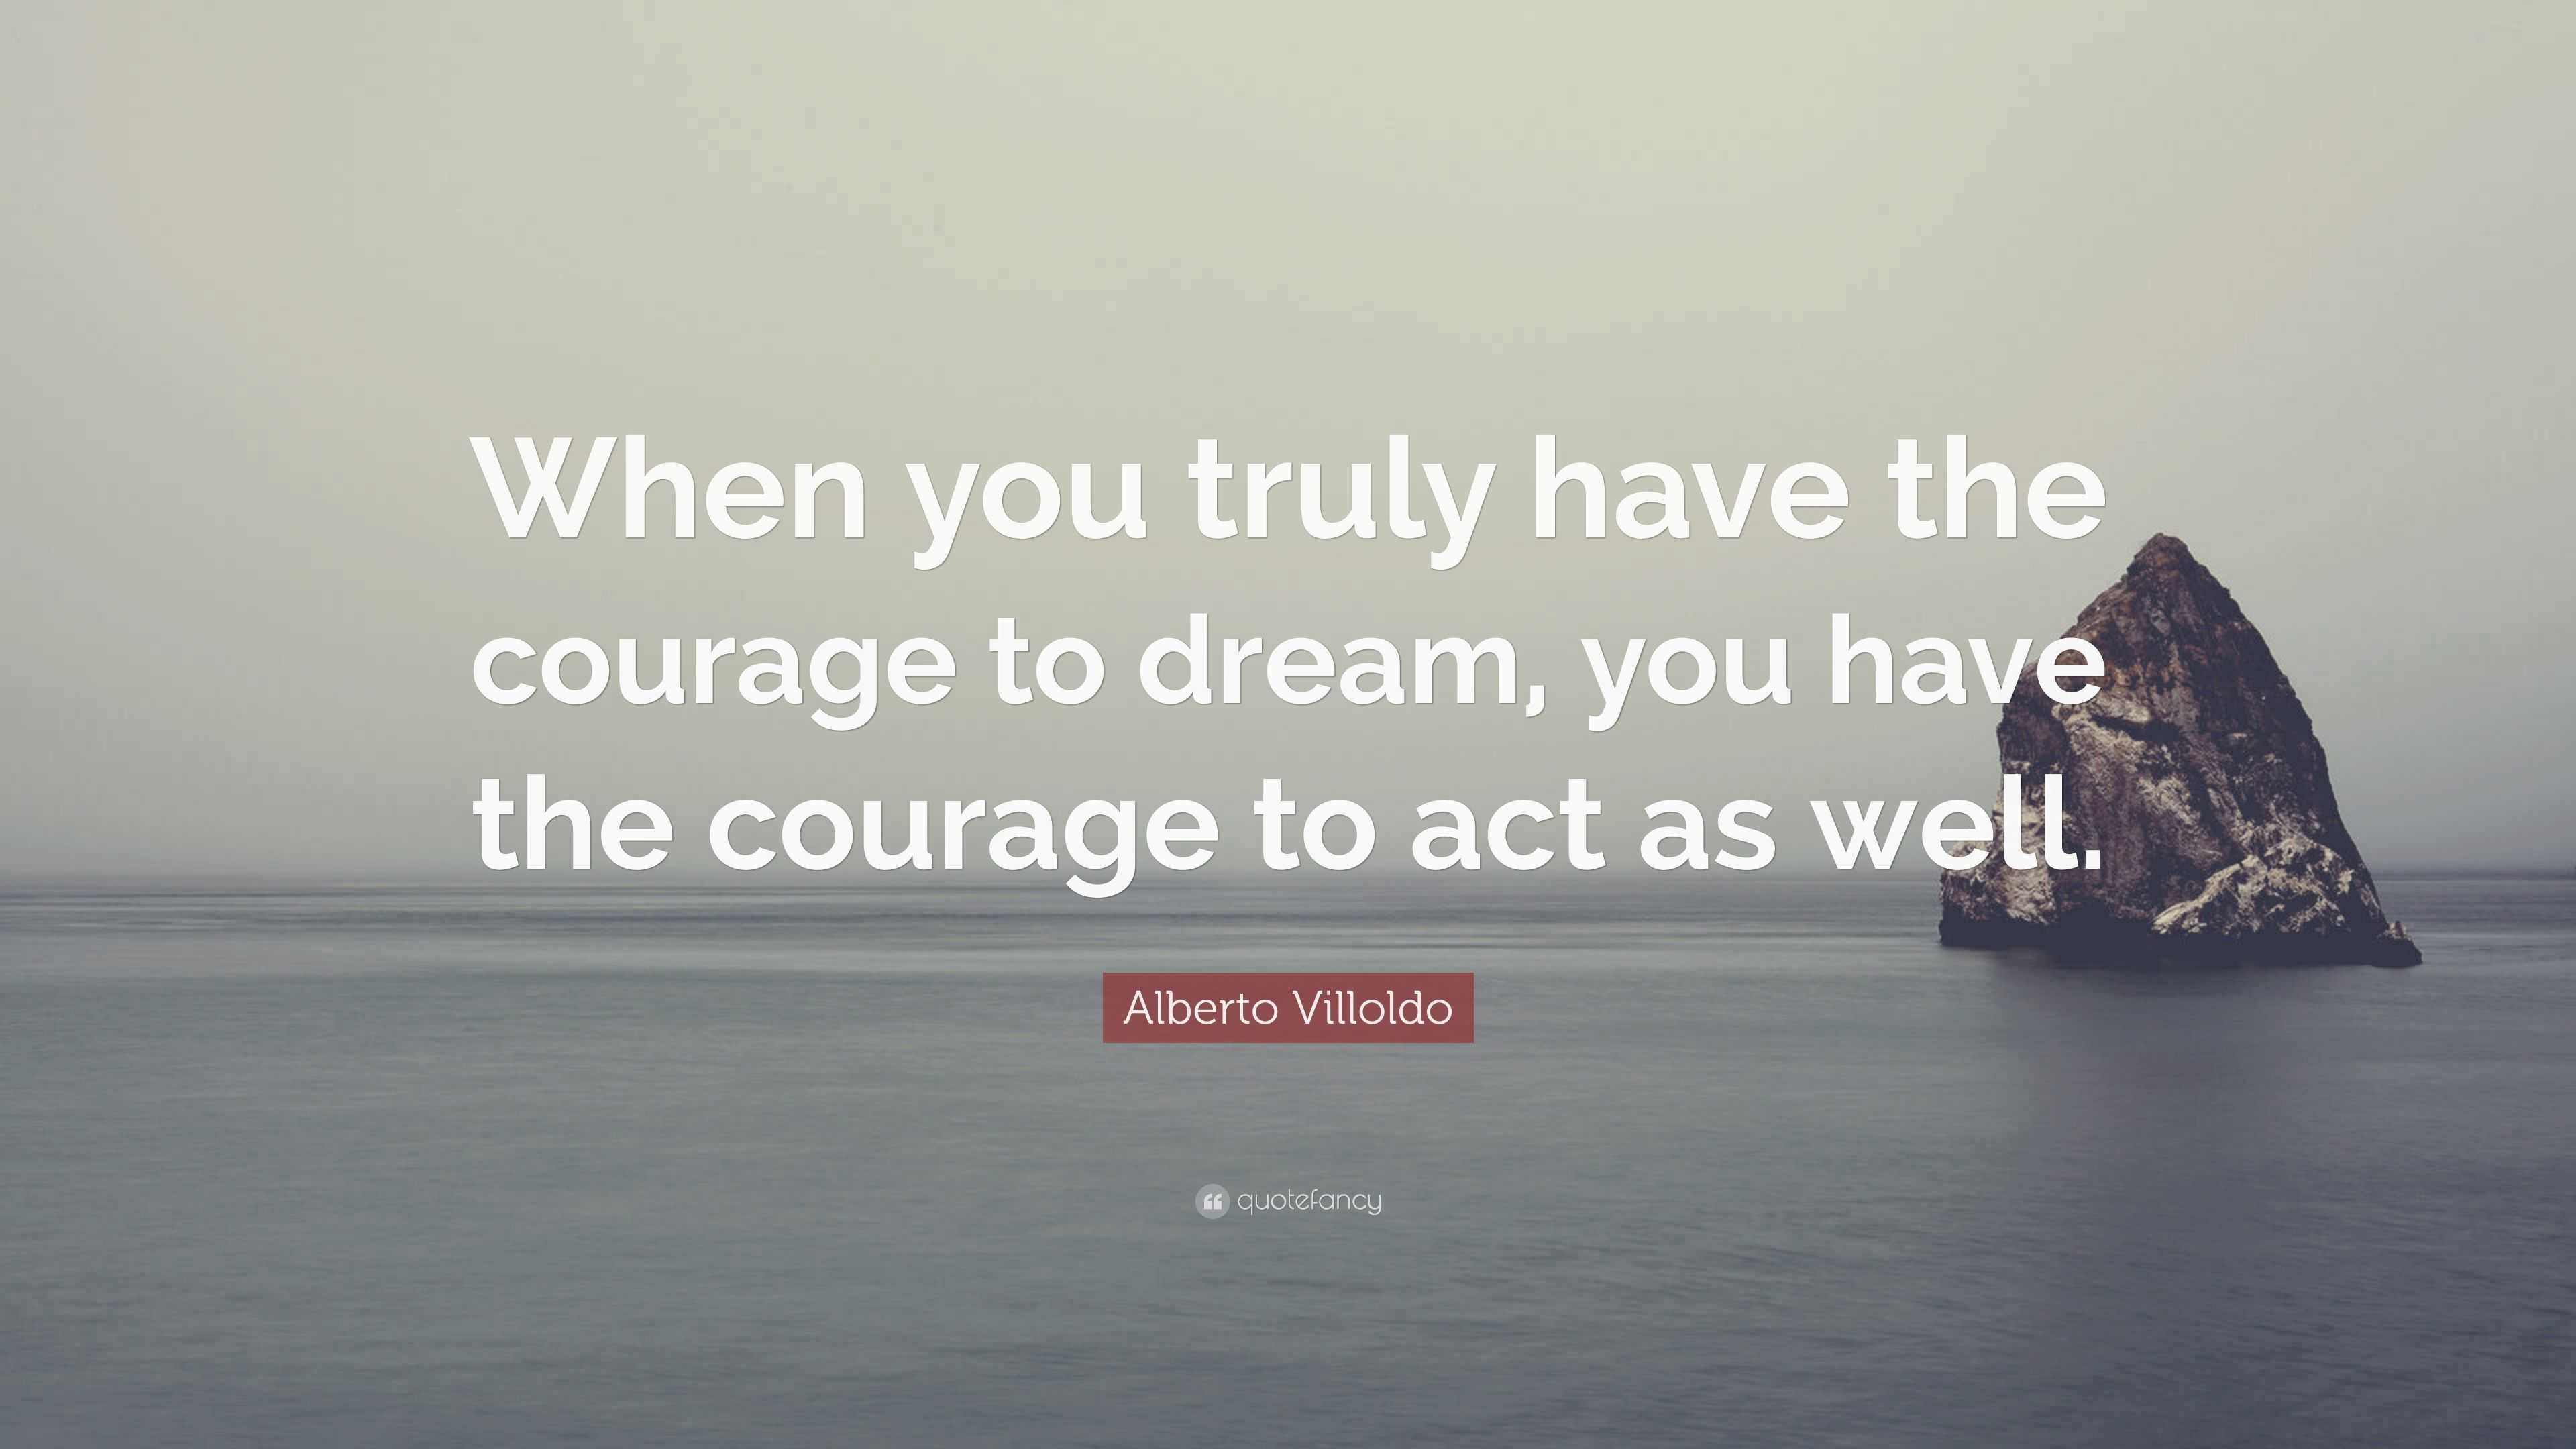 Alberto Villoldo Quote: “When you truly have the courage to dream, you ...